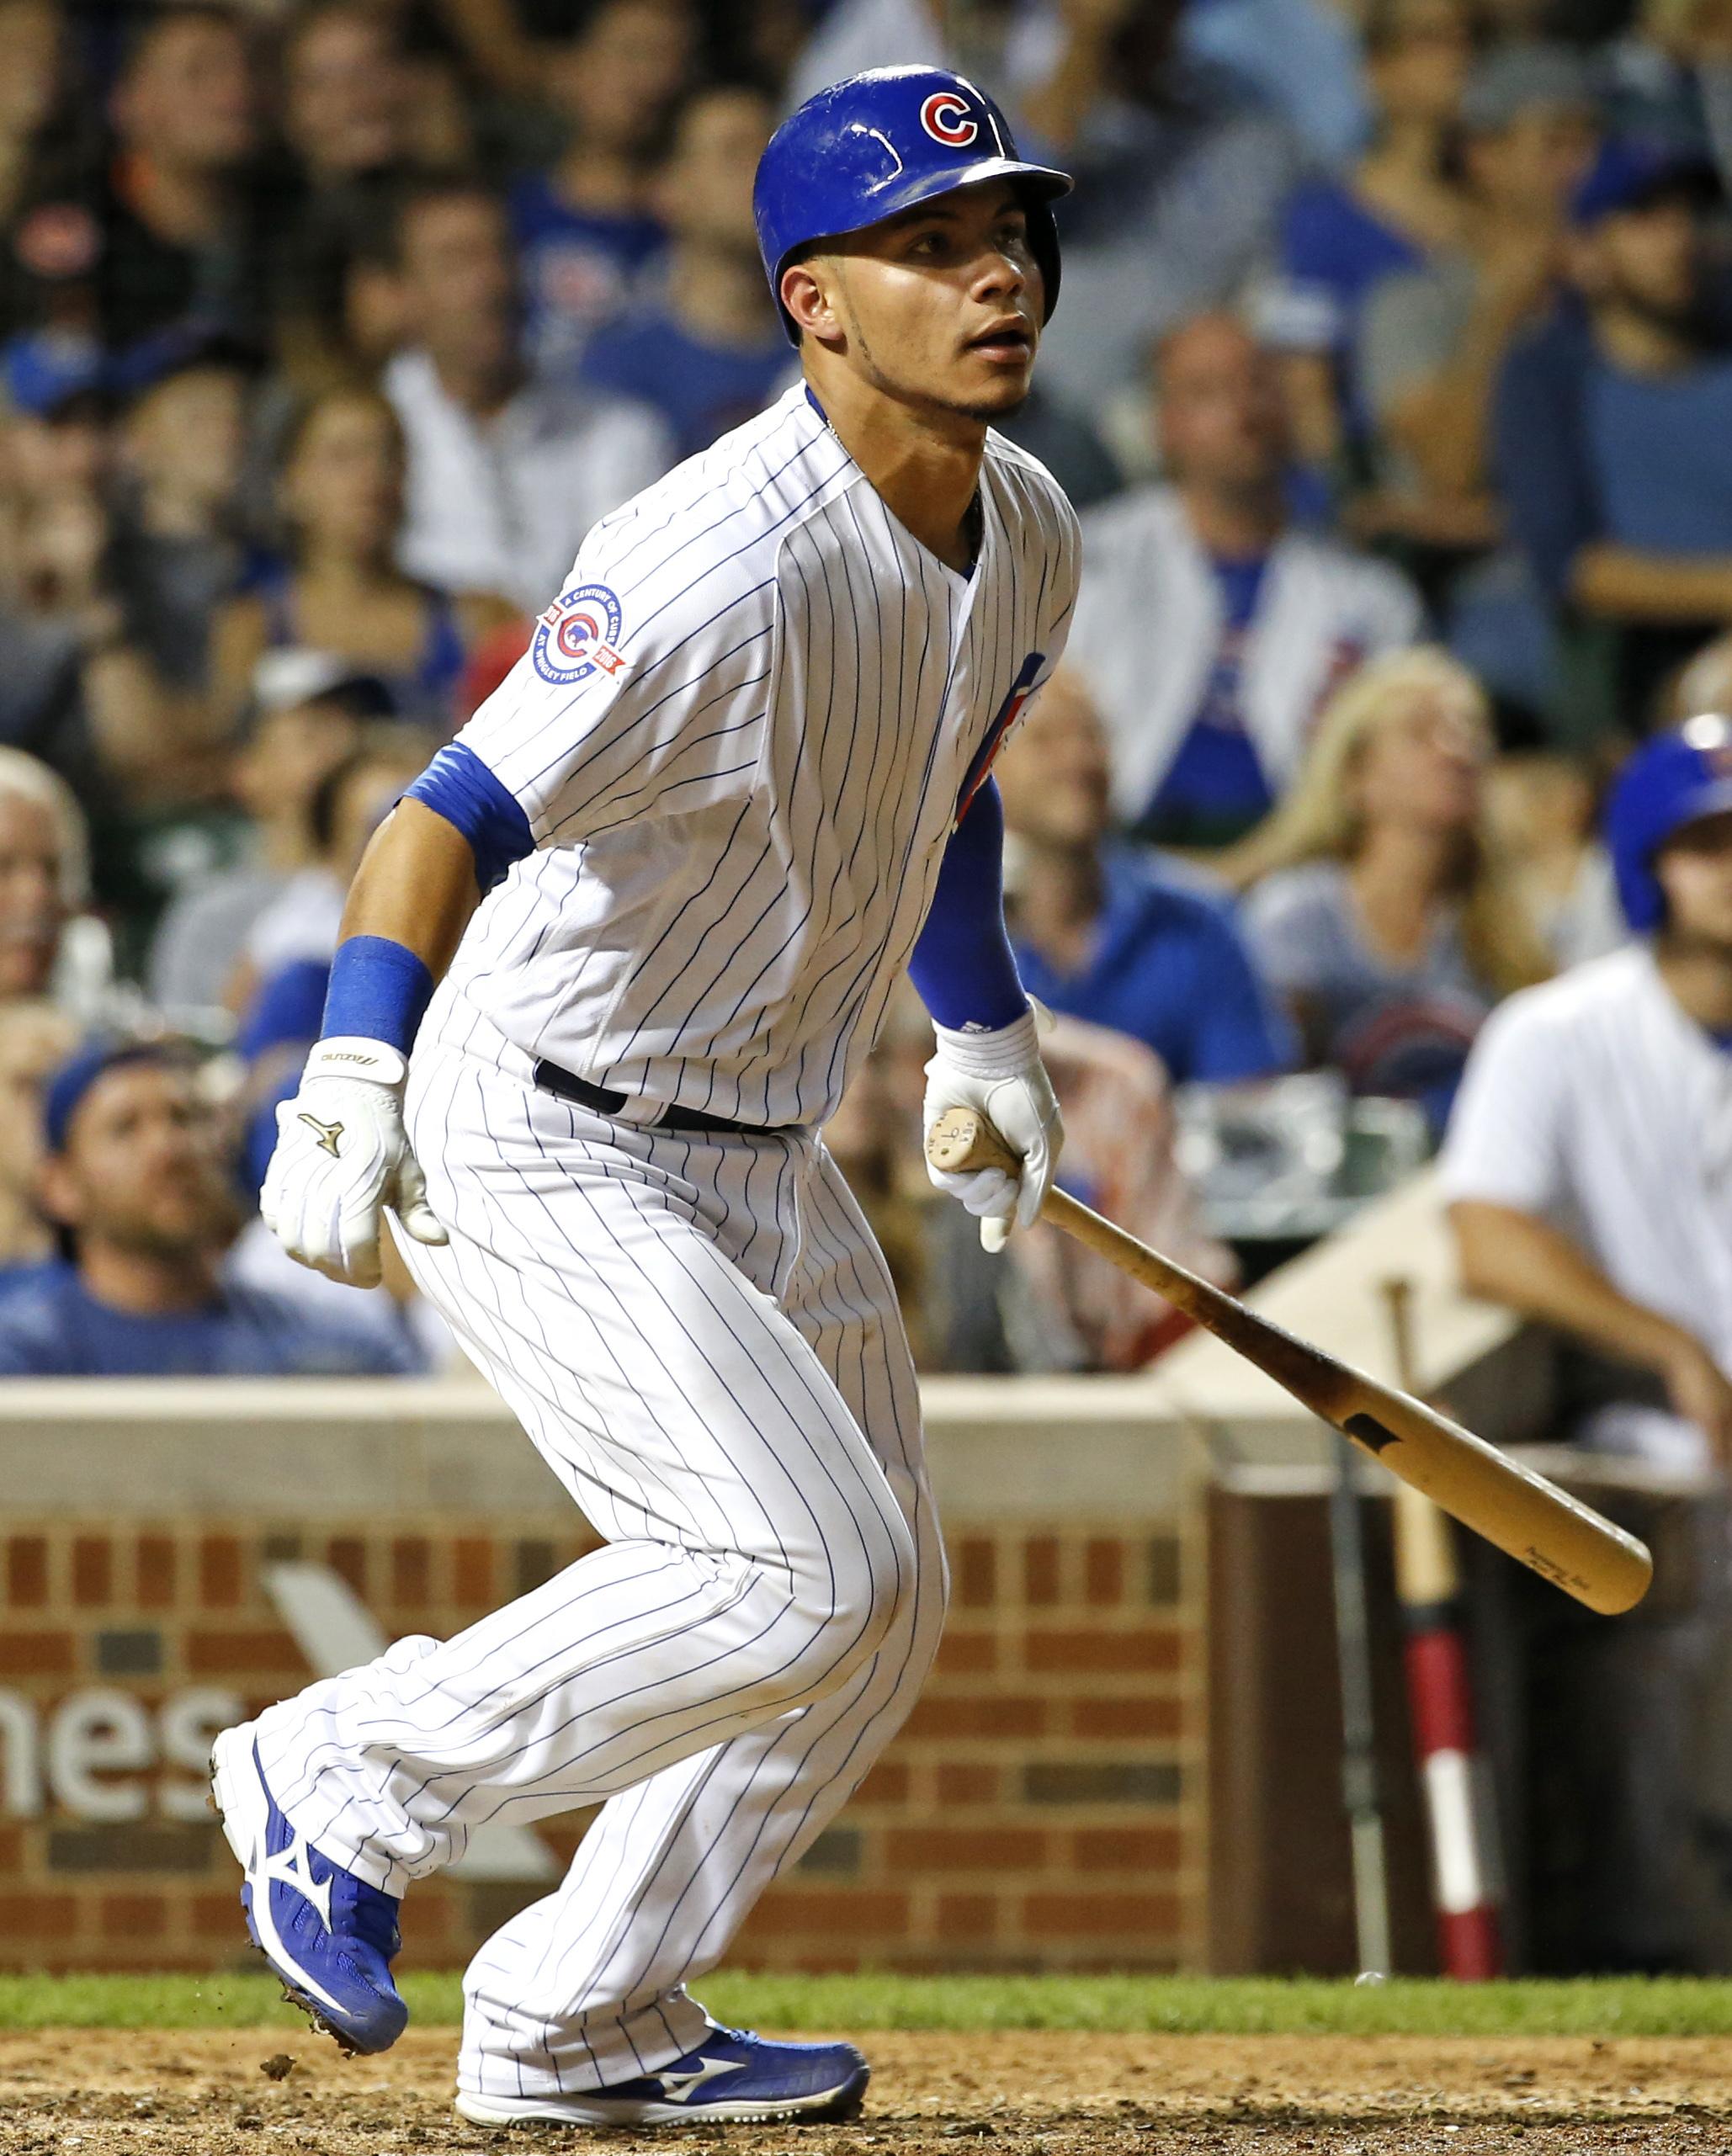 Chicago Cubs catcher Willson Contreras remains day to day, while